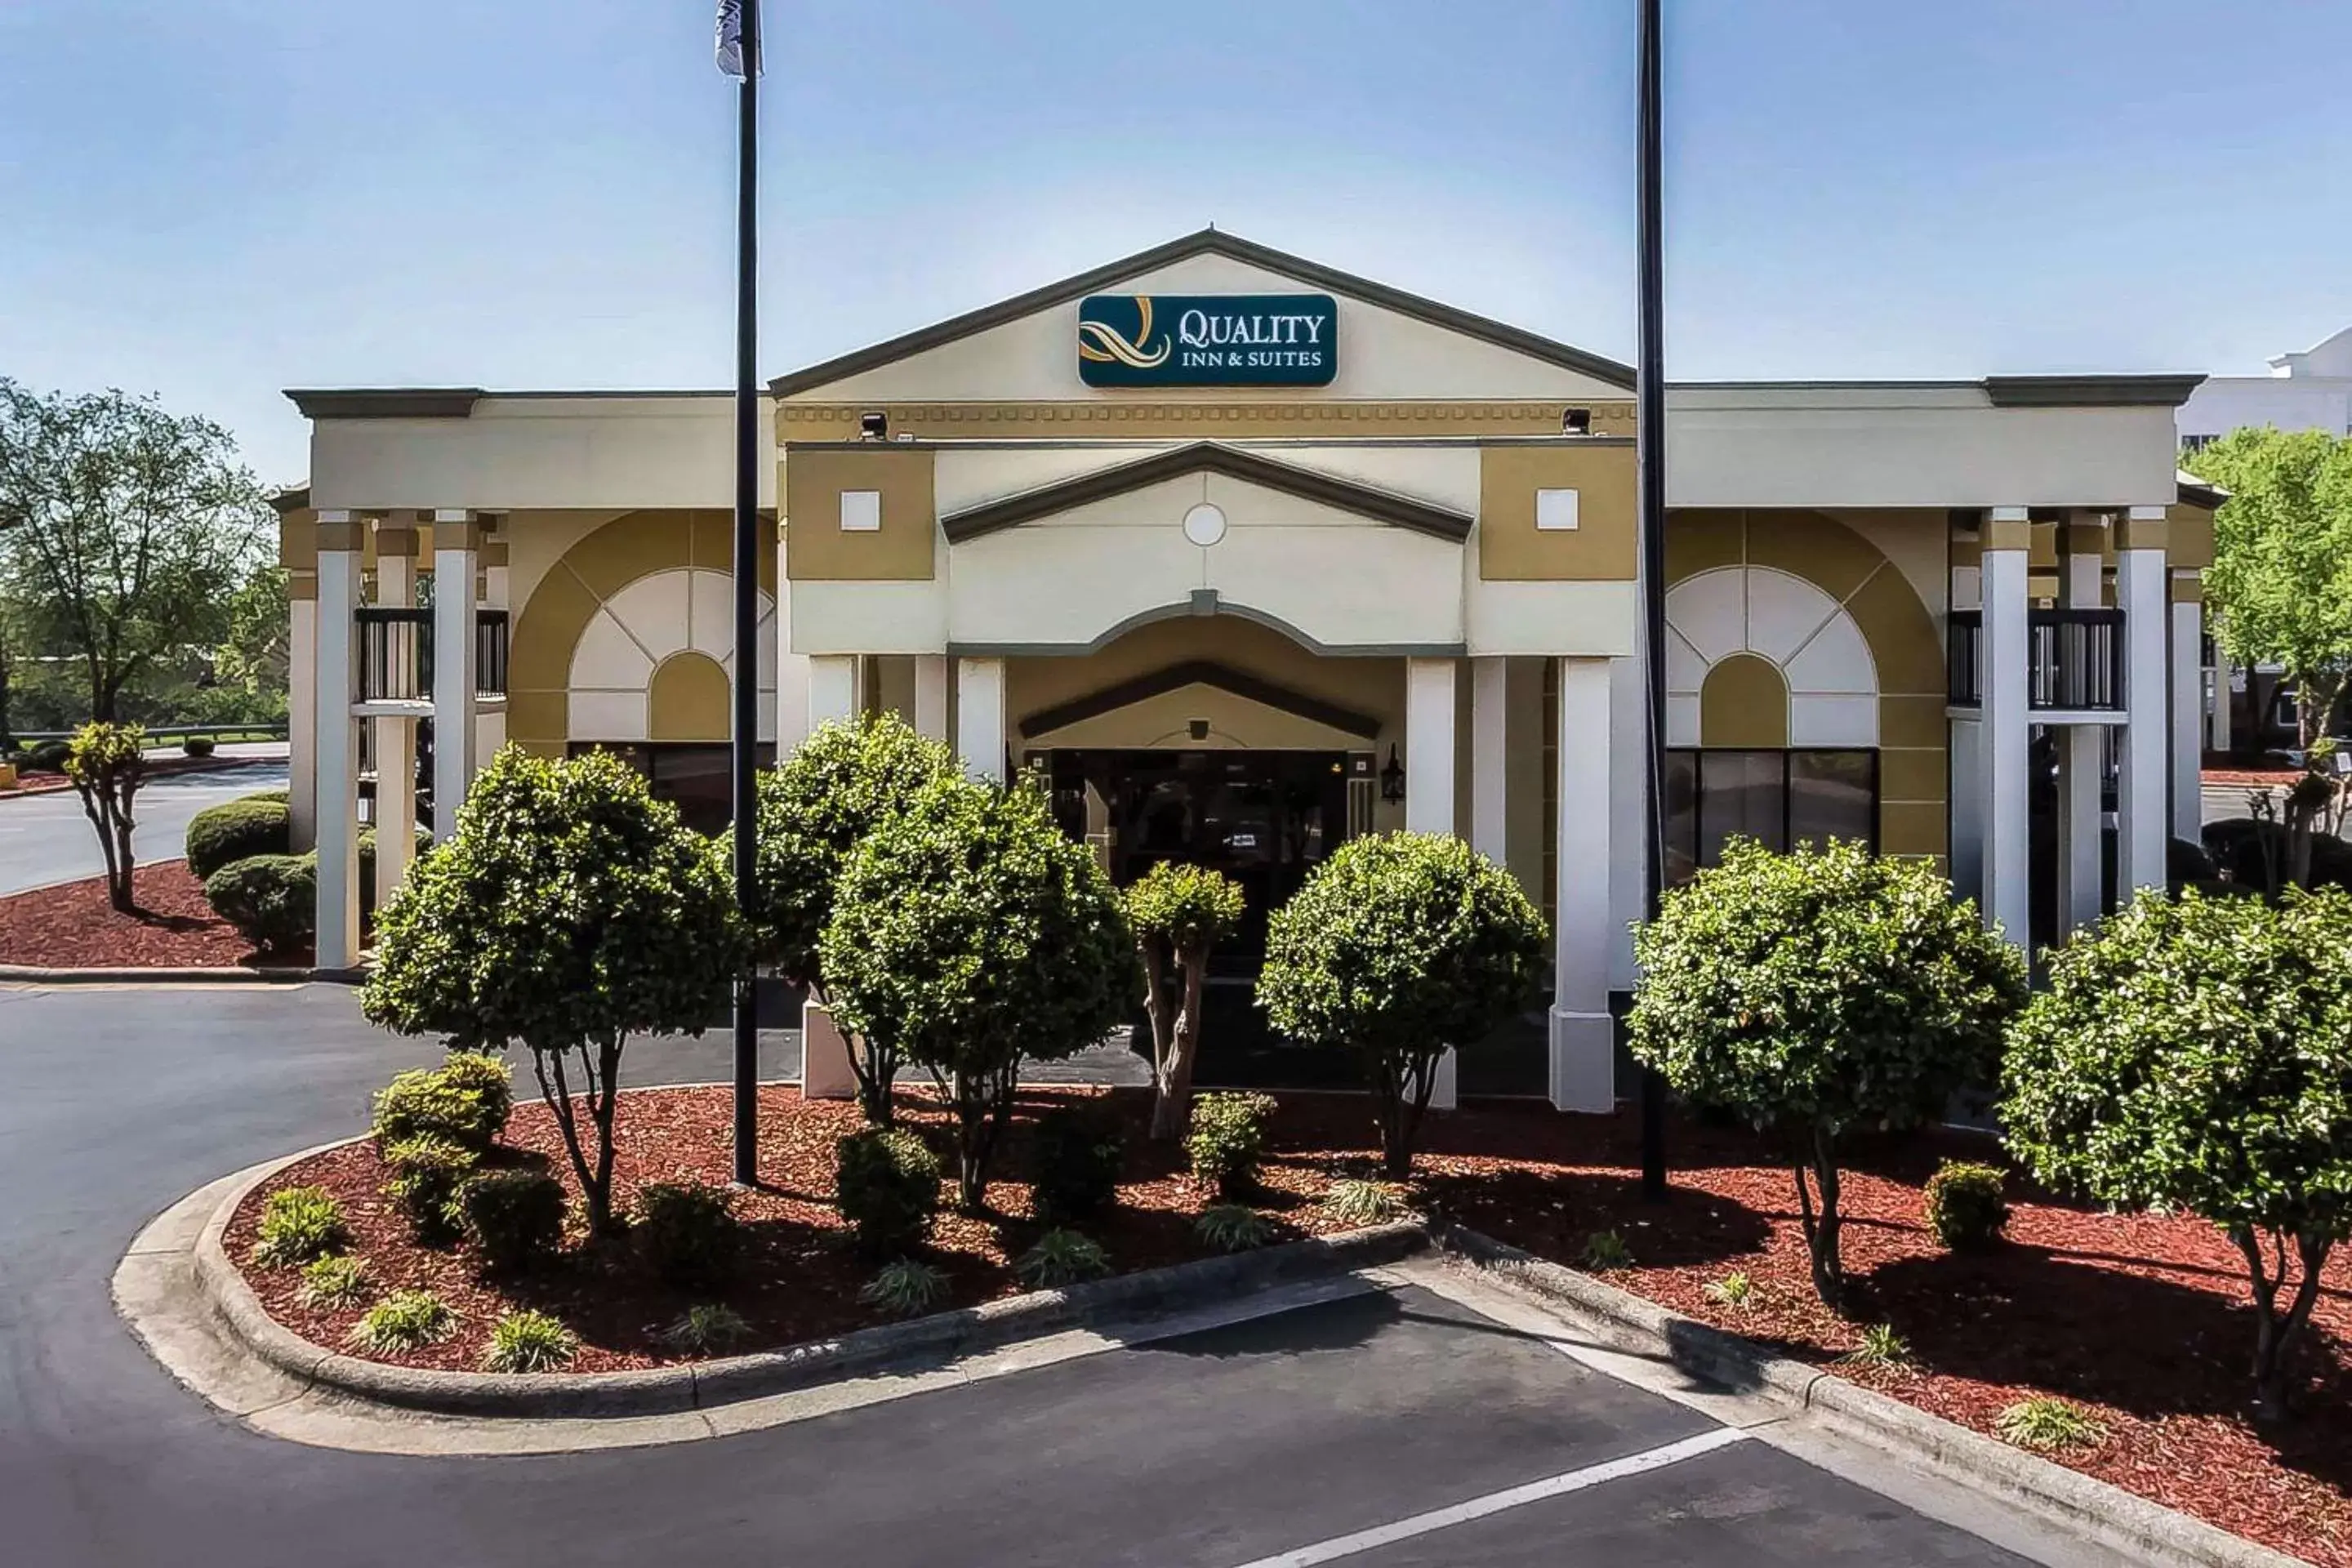 Property building in Quality Inn & Suites Mooresville-Lake Norman